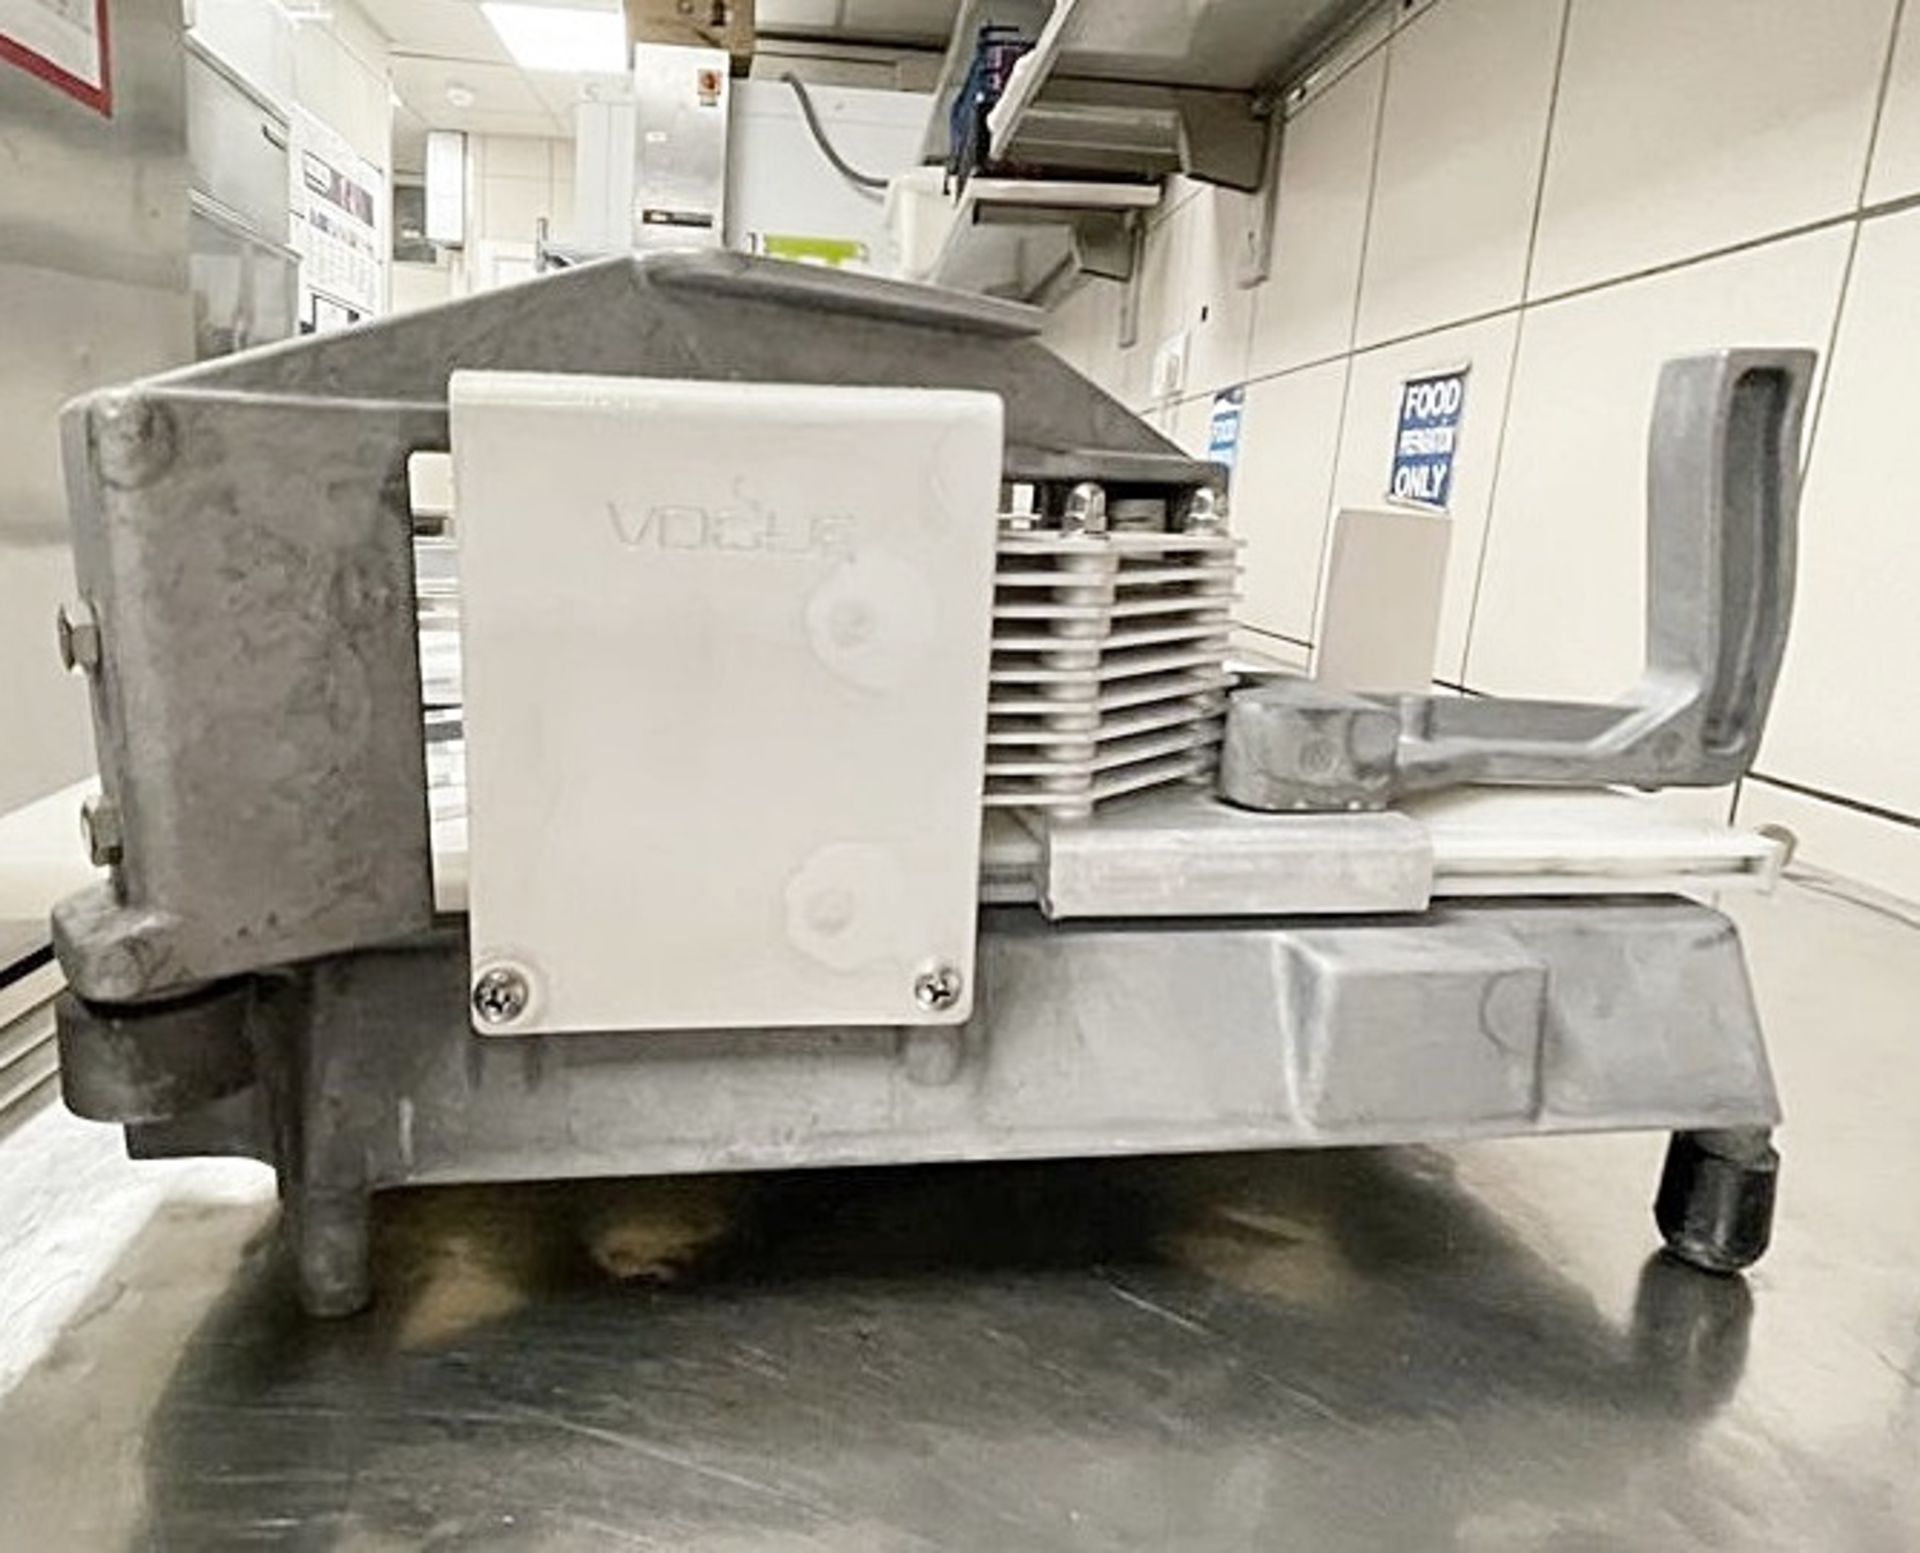 3 x Assorted Commercial Vegitable Slicers / Choppers - More Information To Follow - Ref: FPSD178 - - Image 3 of 4